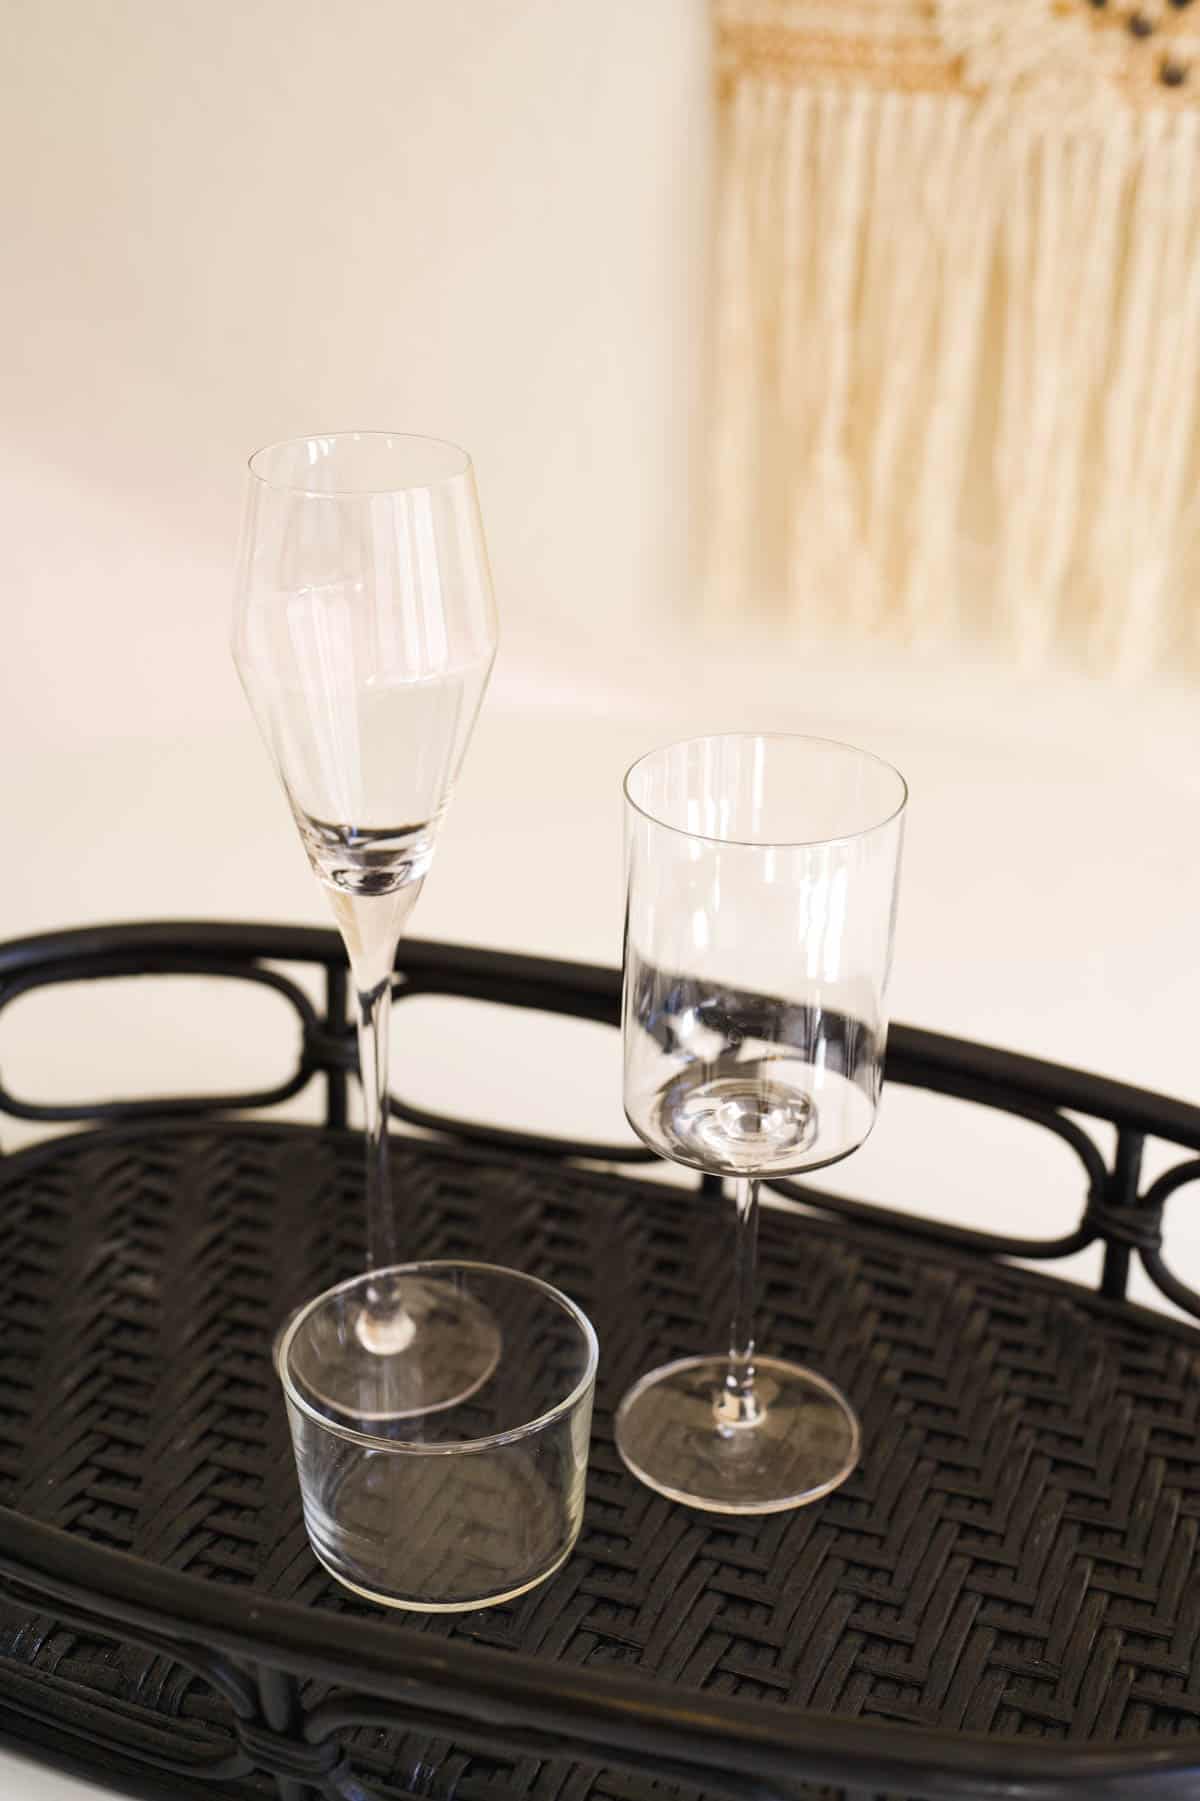 Two types of stemmed wine glasses and a short round glass on a black tray on a table.